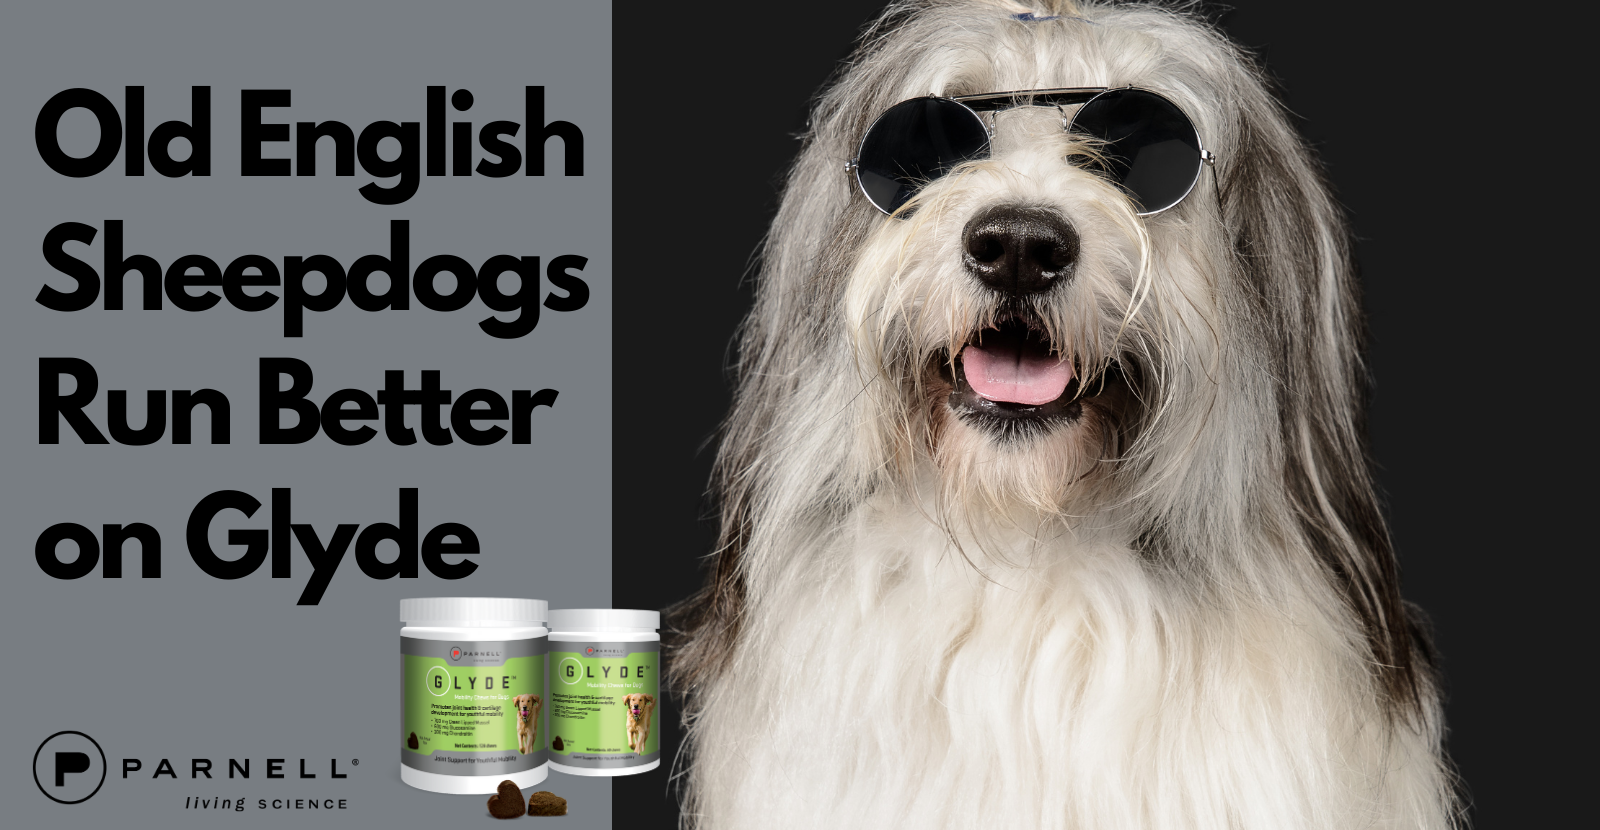 We Love Old English Sheepdogs